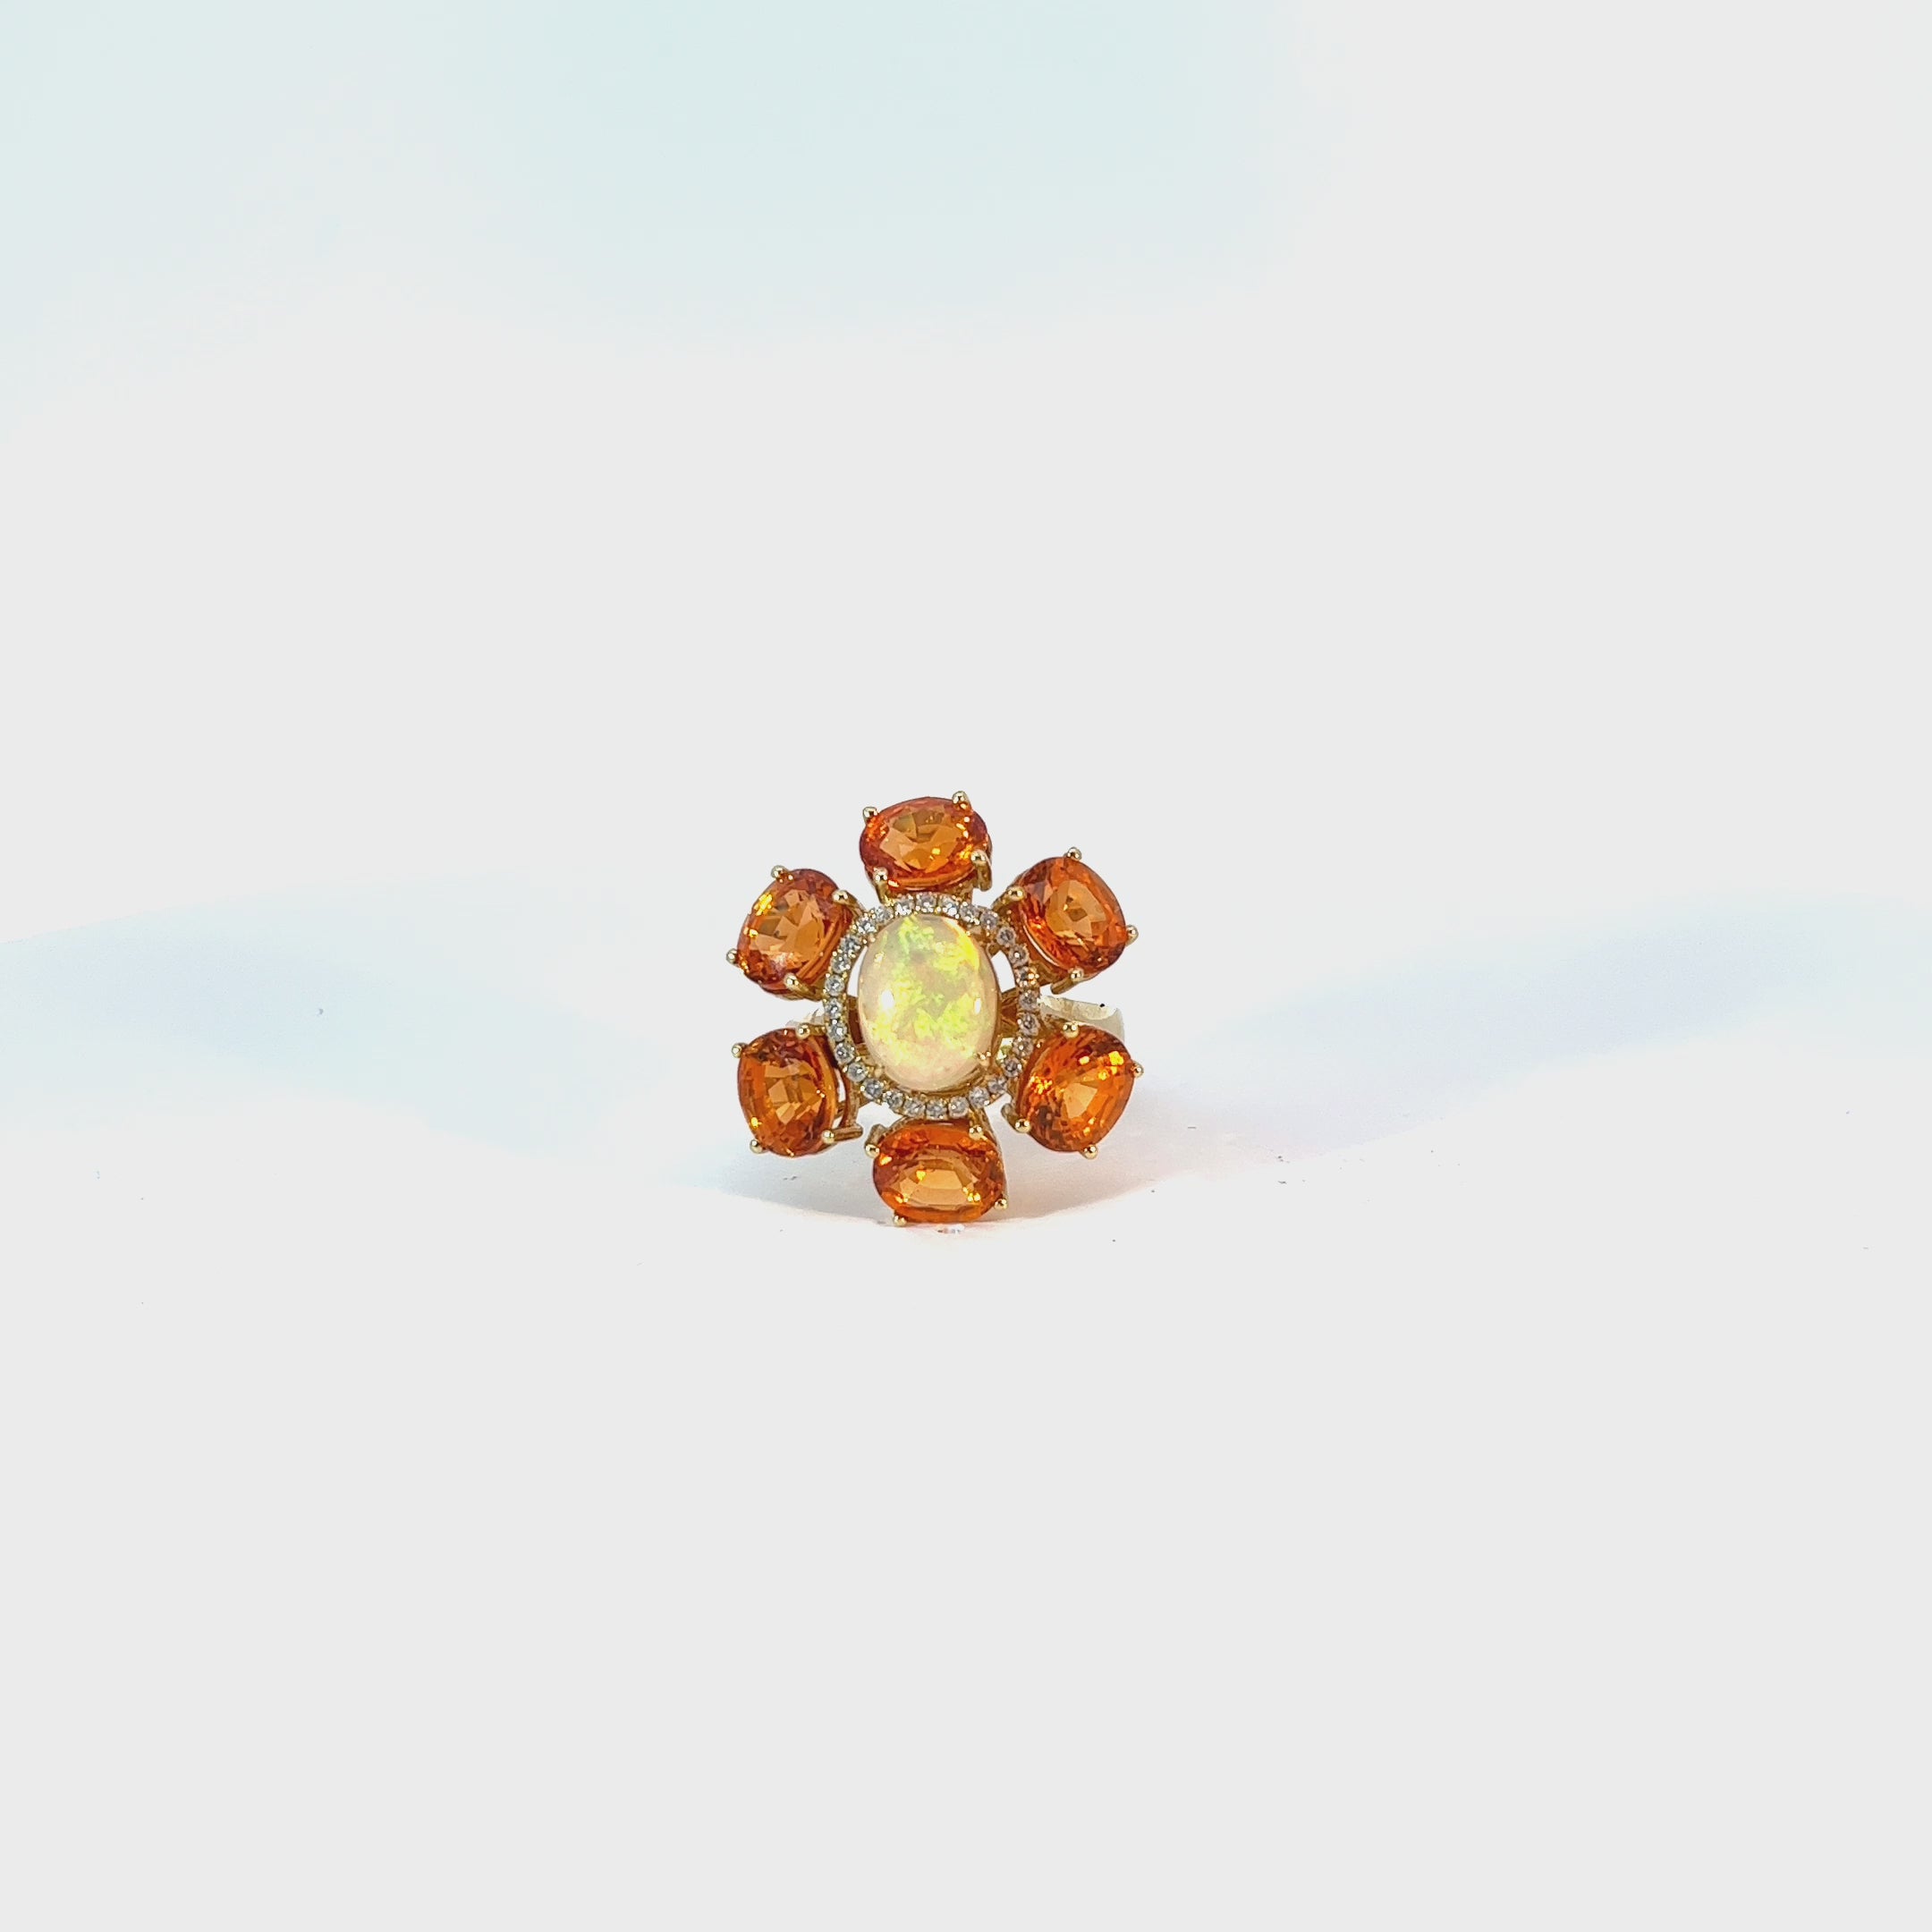 Ladies 14k yellow gold Citrine, diamond, and mexican opal ring